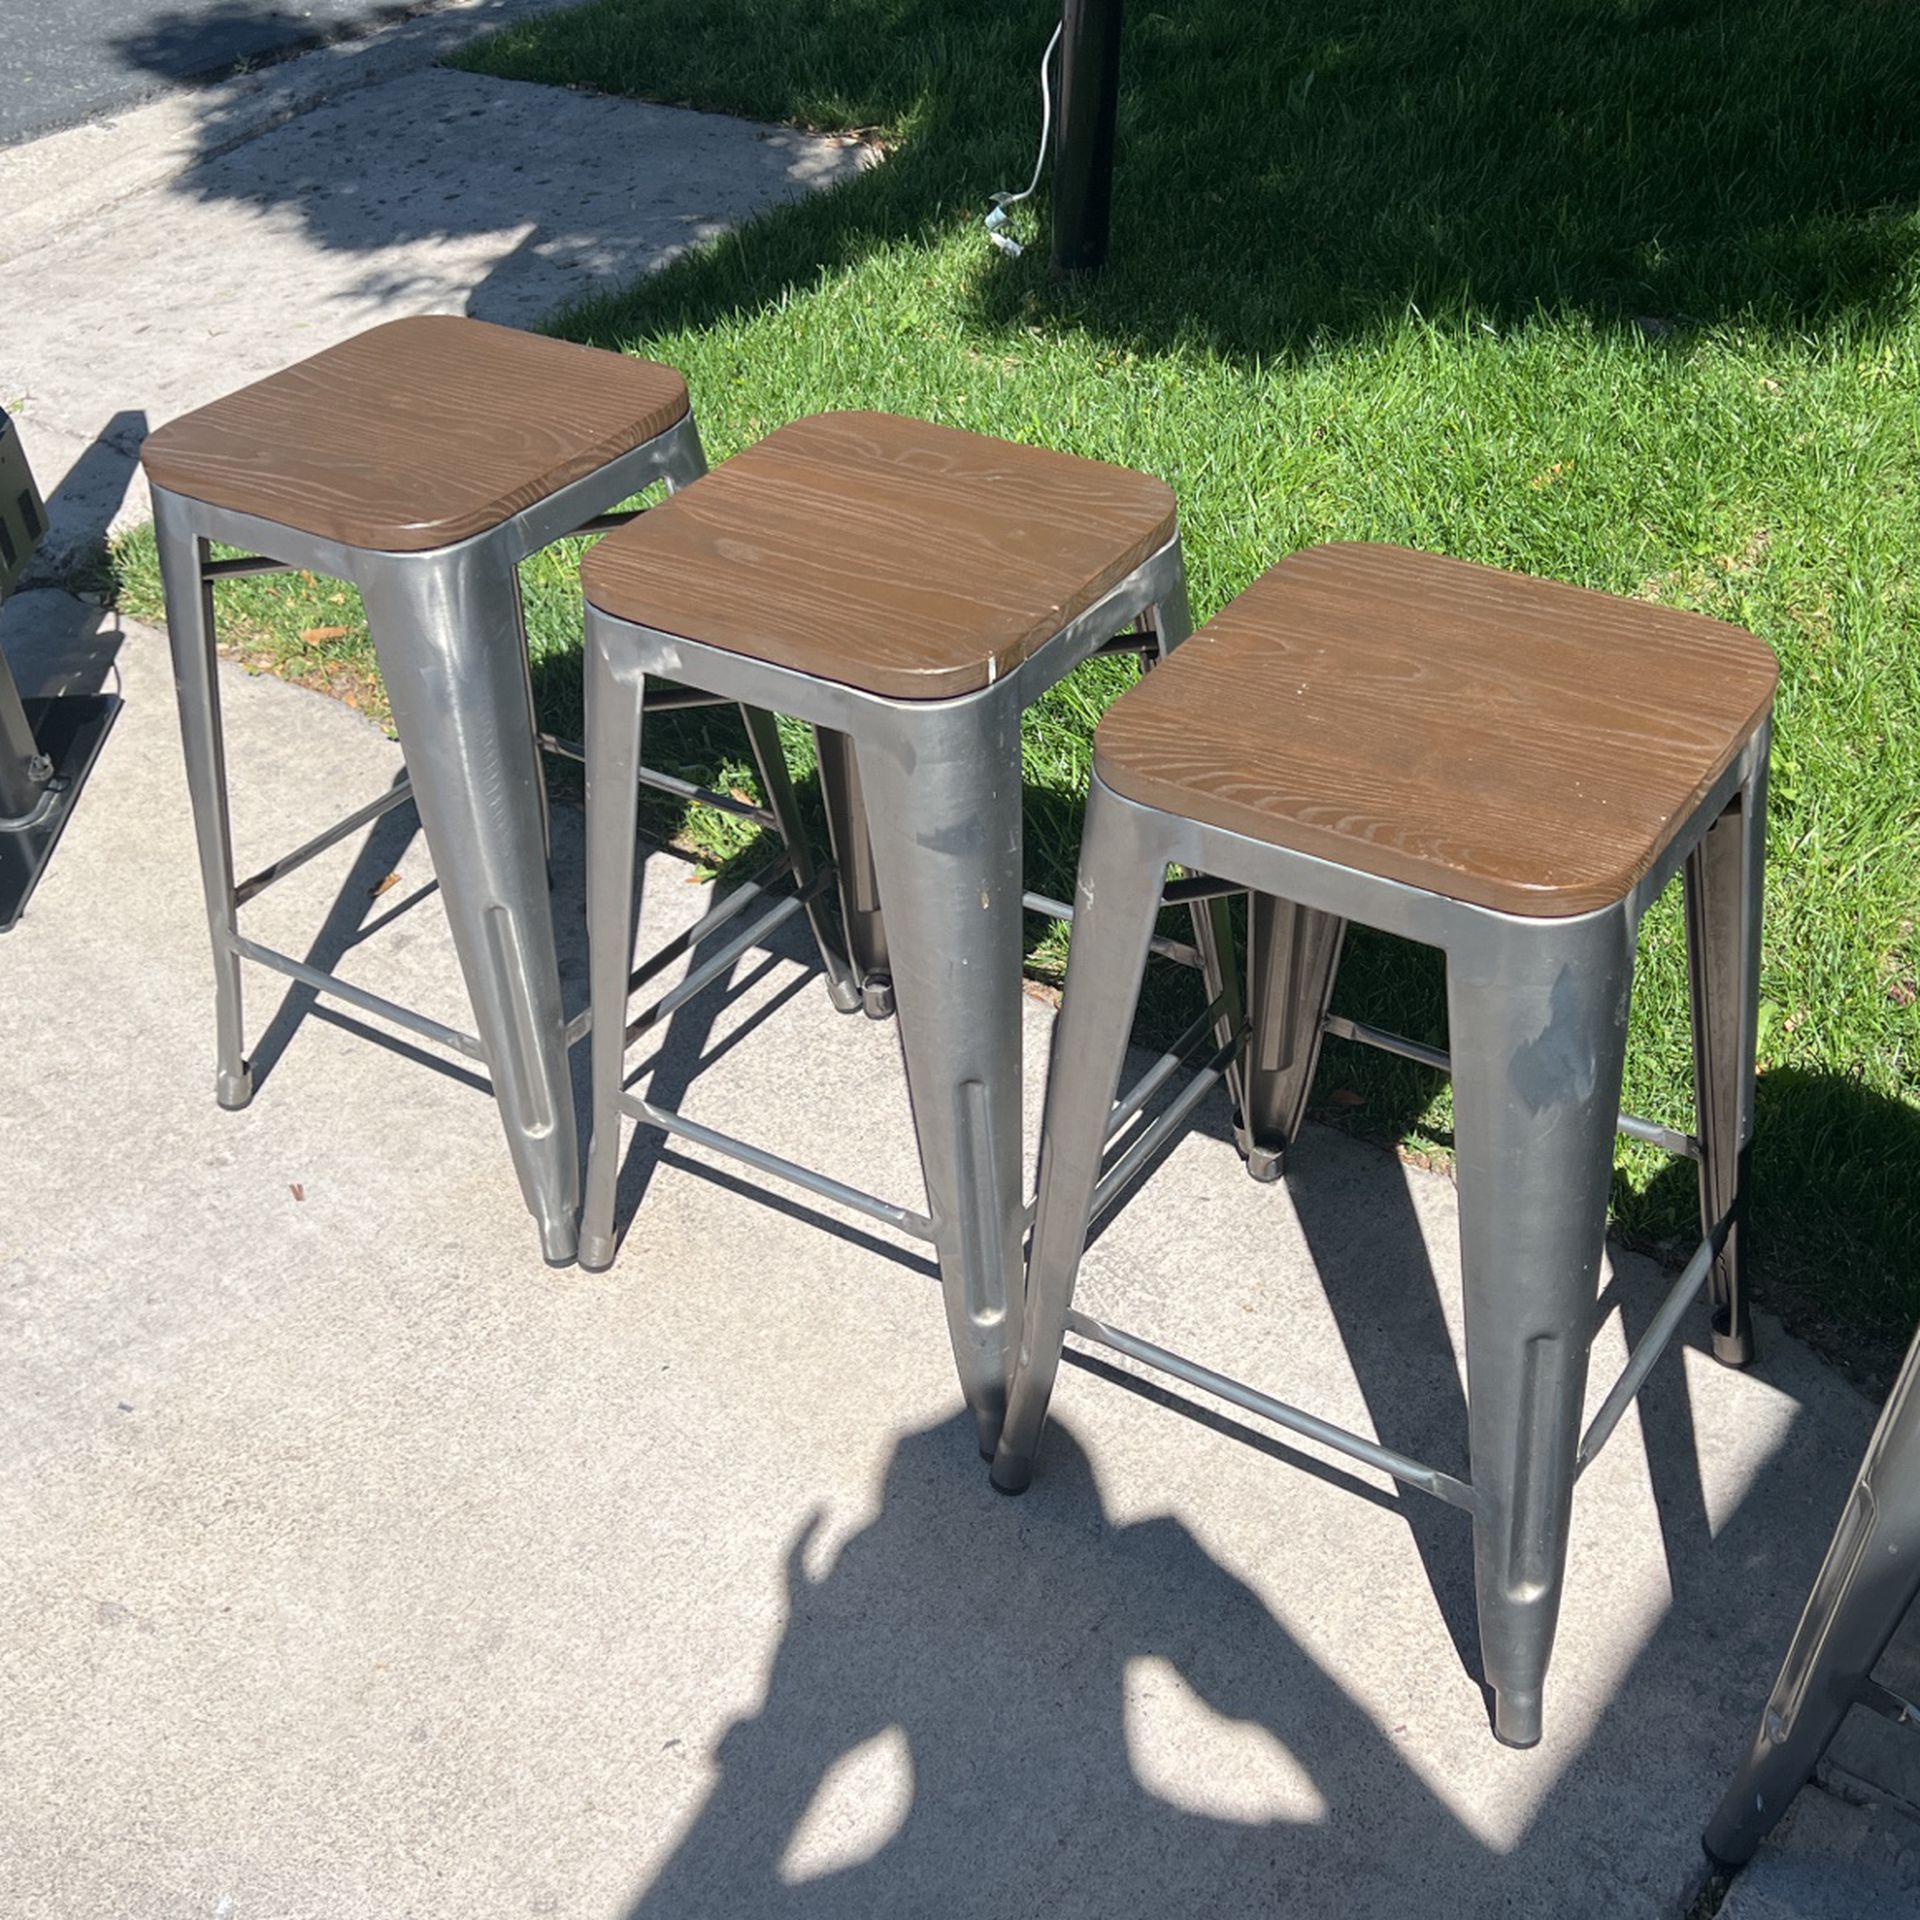 Metal Stools With Wooden Seat - Three Stools